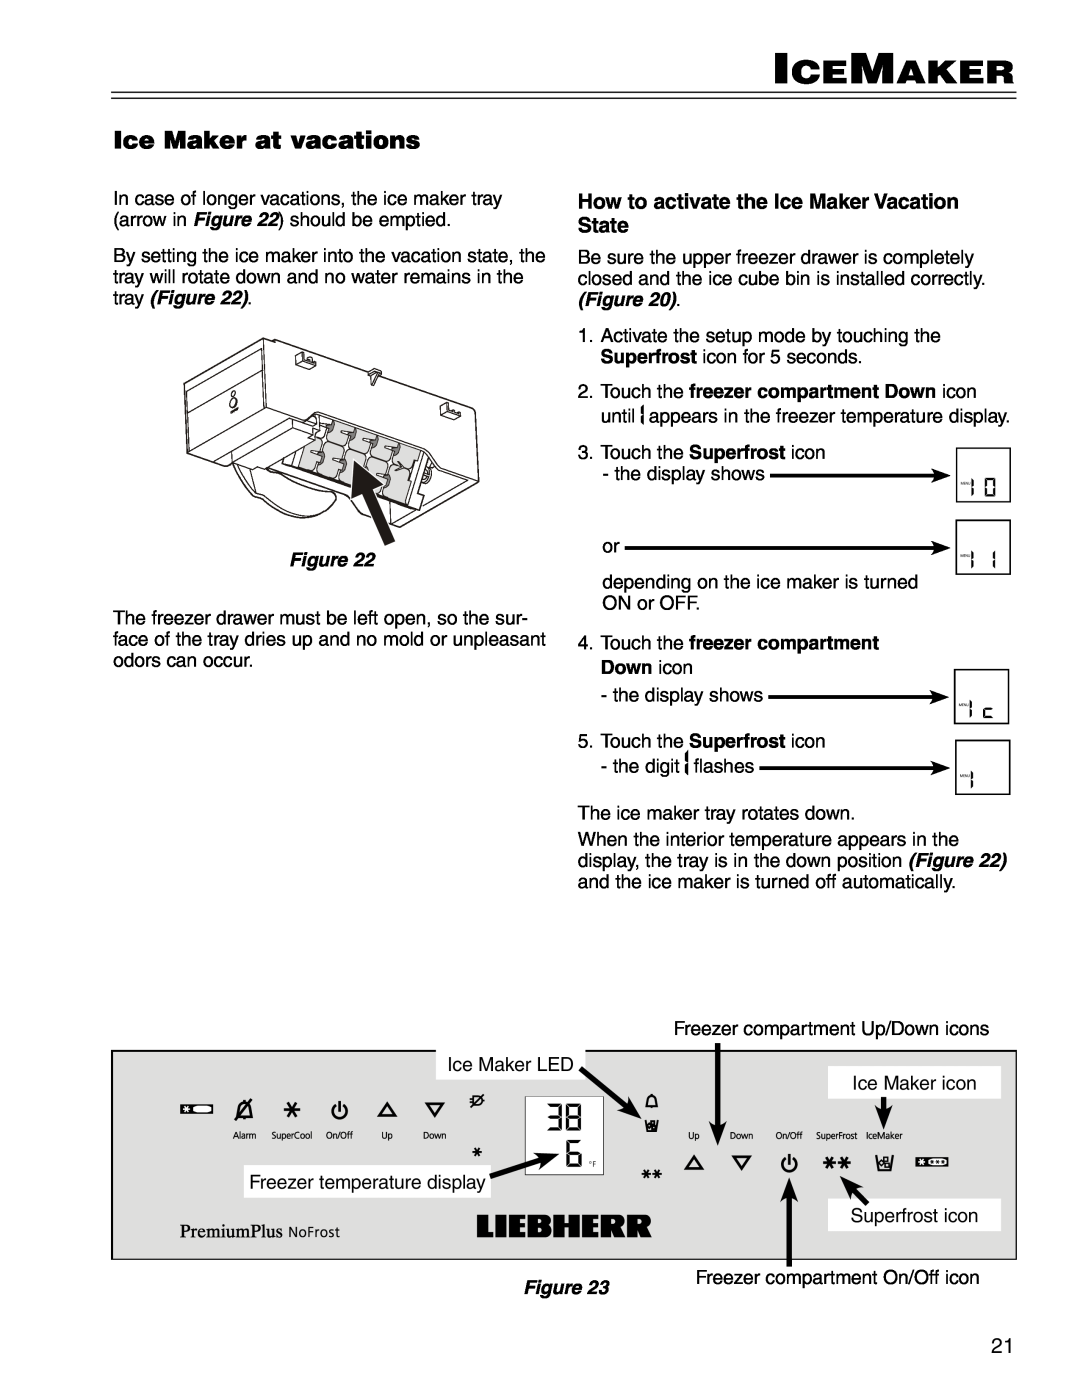 Liebherr HC 7081411-00 manual Ice Maker at vacations, How to activate the Ice Maker Vacation, State, tray Figure, Icemaker 